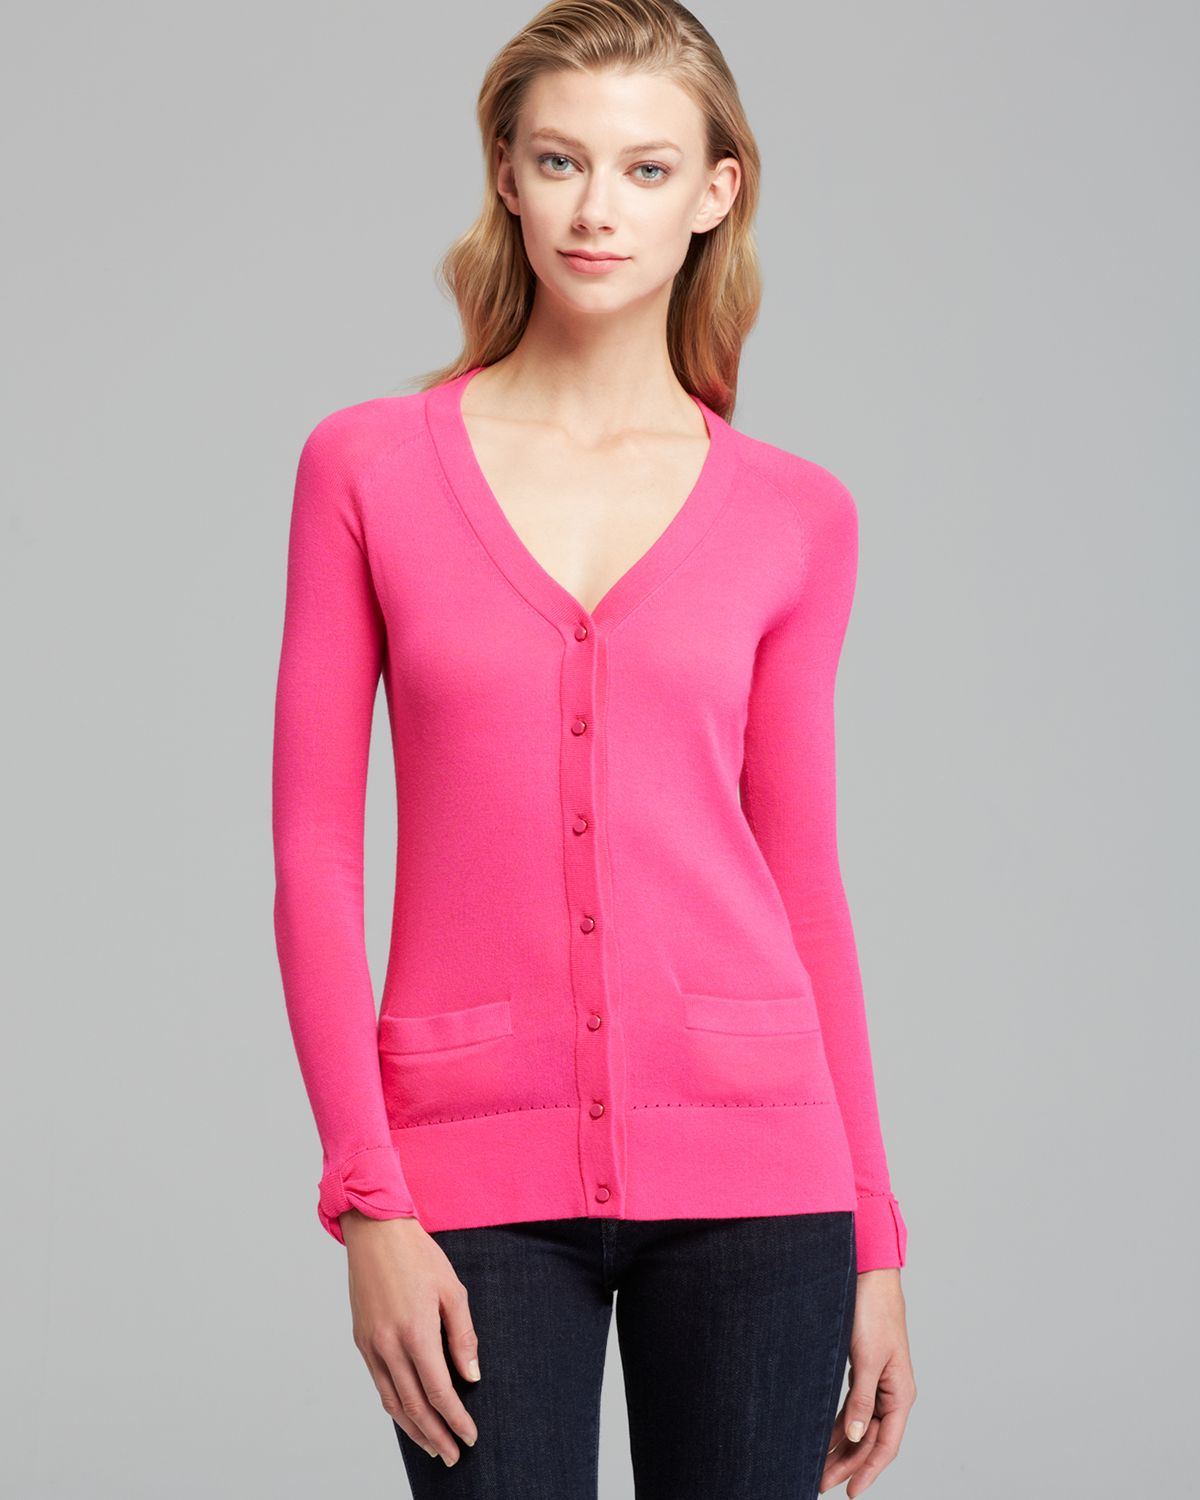 Kate Spade Cary Cardigan in Pink (Bougainvillea) | Lyst